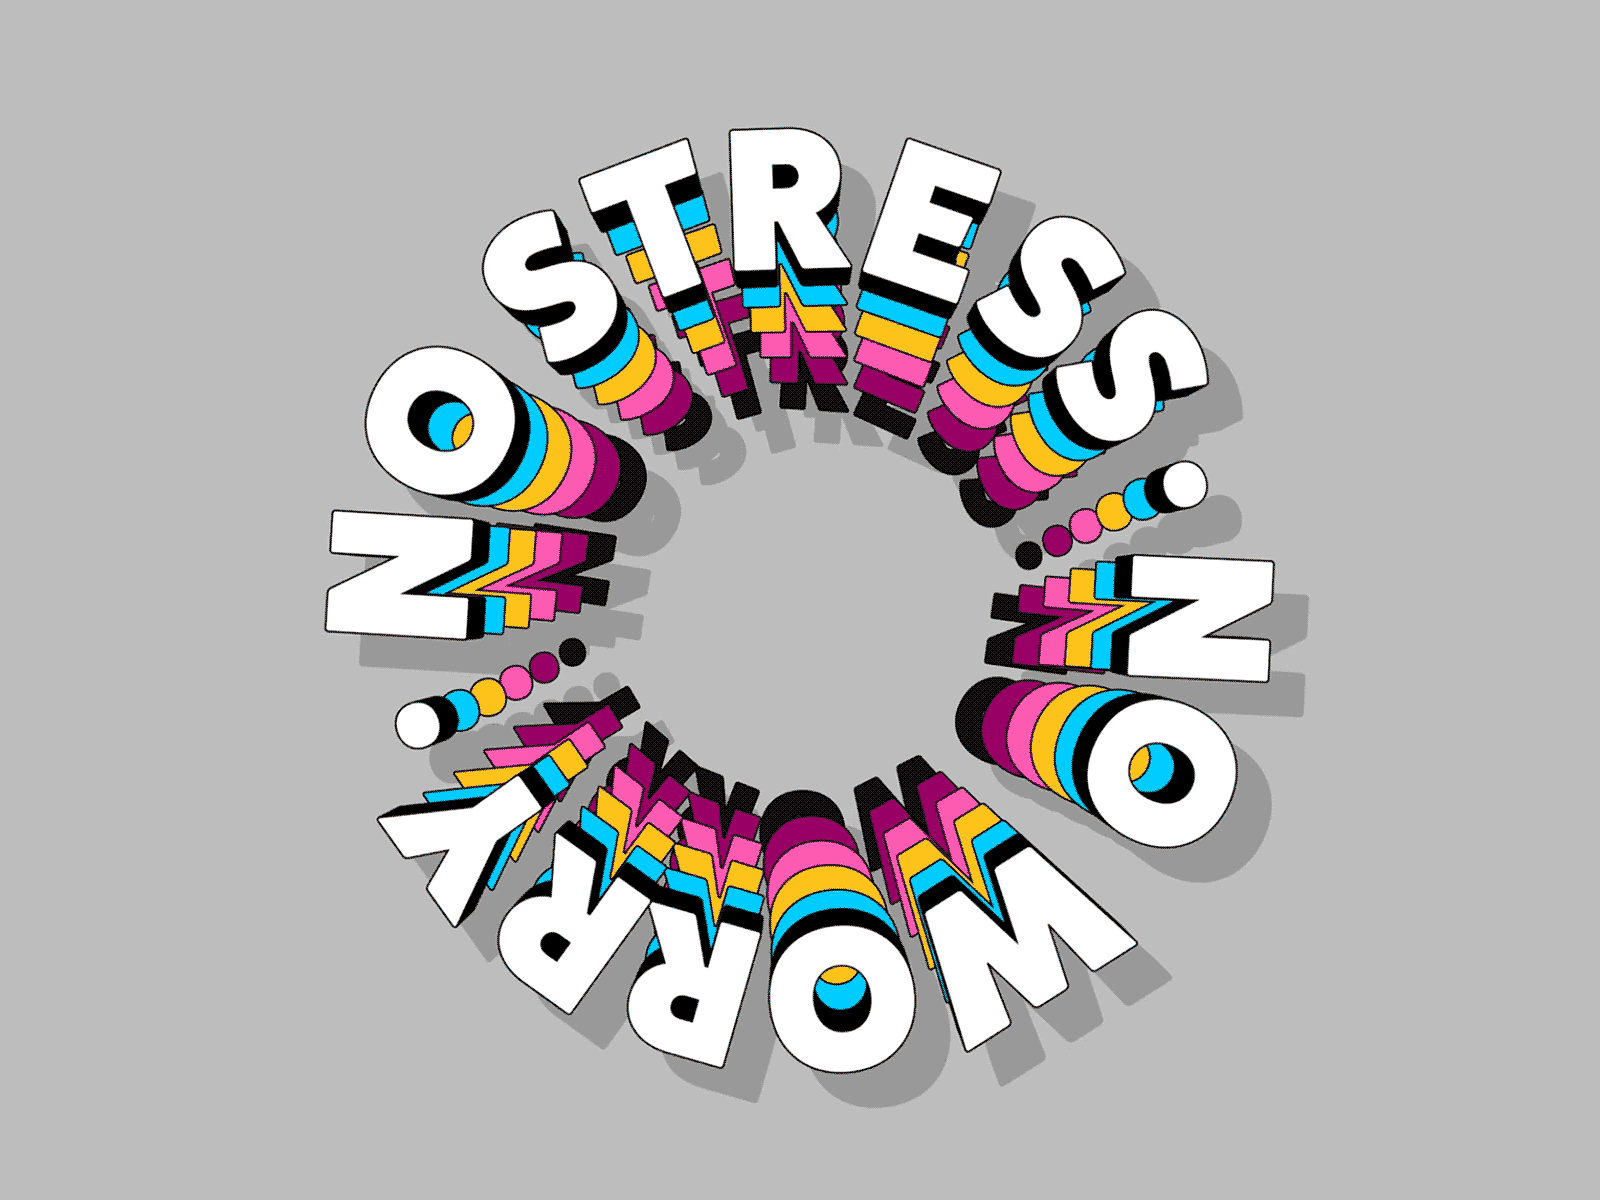 NO STRESS by Mat Voyce on Dribbble